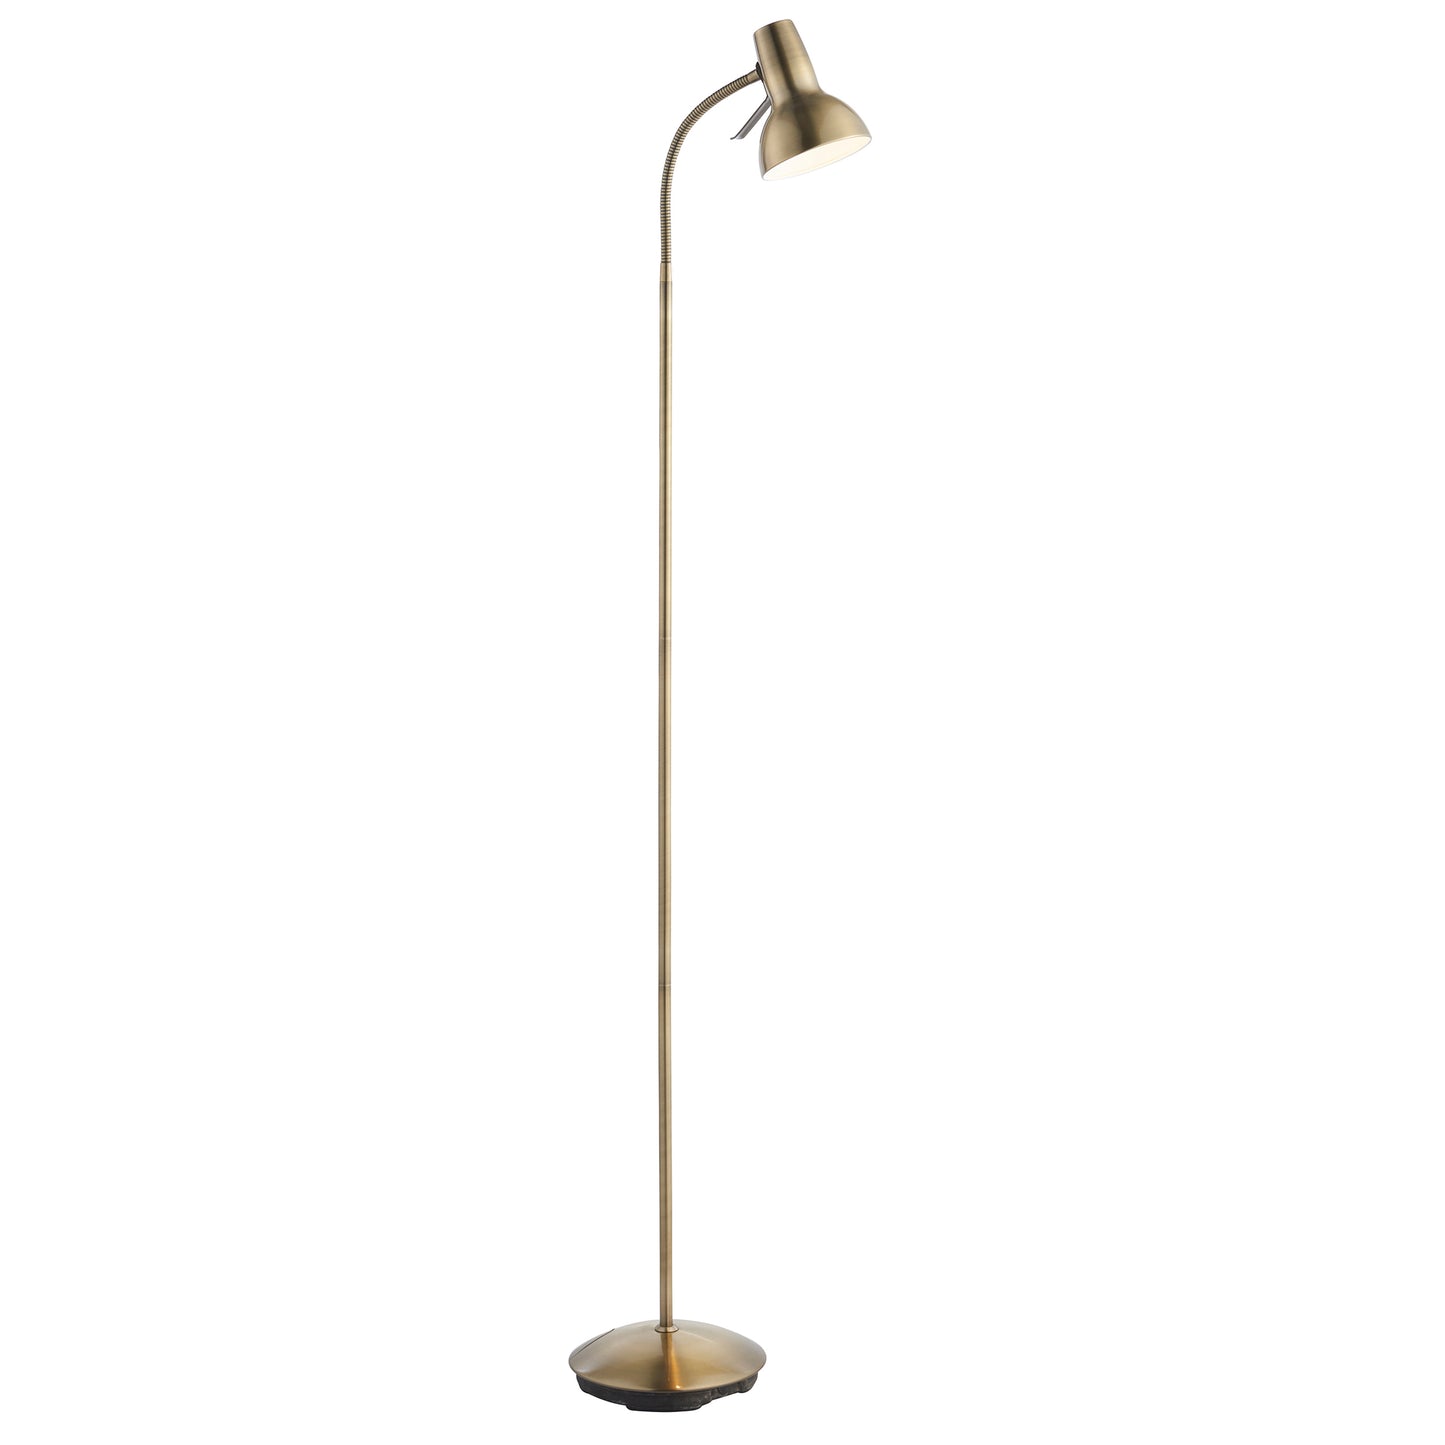 An Antique Brass Bickerton Floor Lamp with a white shade for interior decor or home furniture.